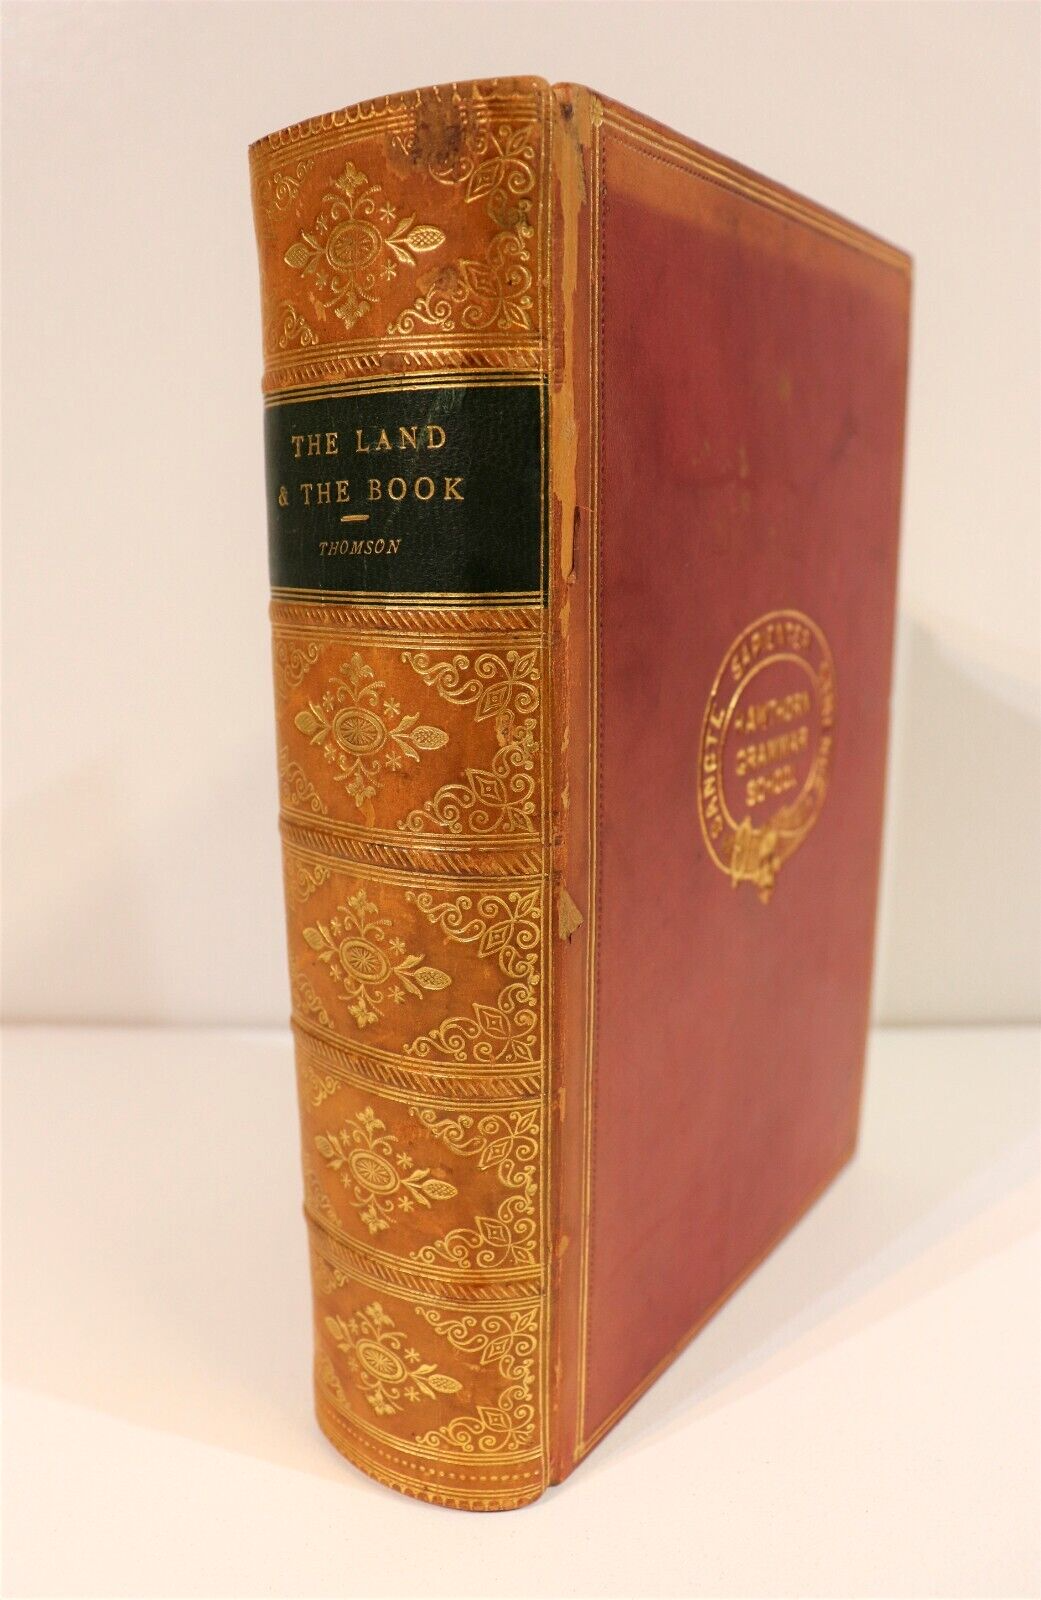 The Land And The Book by W.M. Thomson - 1878 - Antique Religious History Book